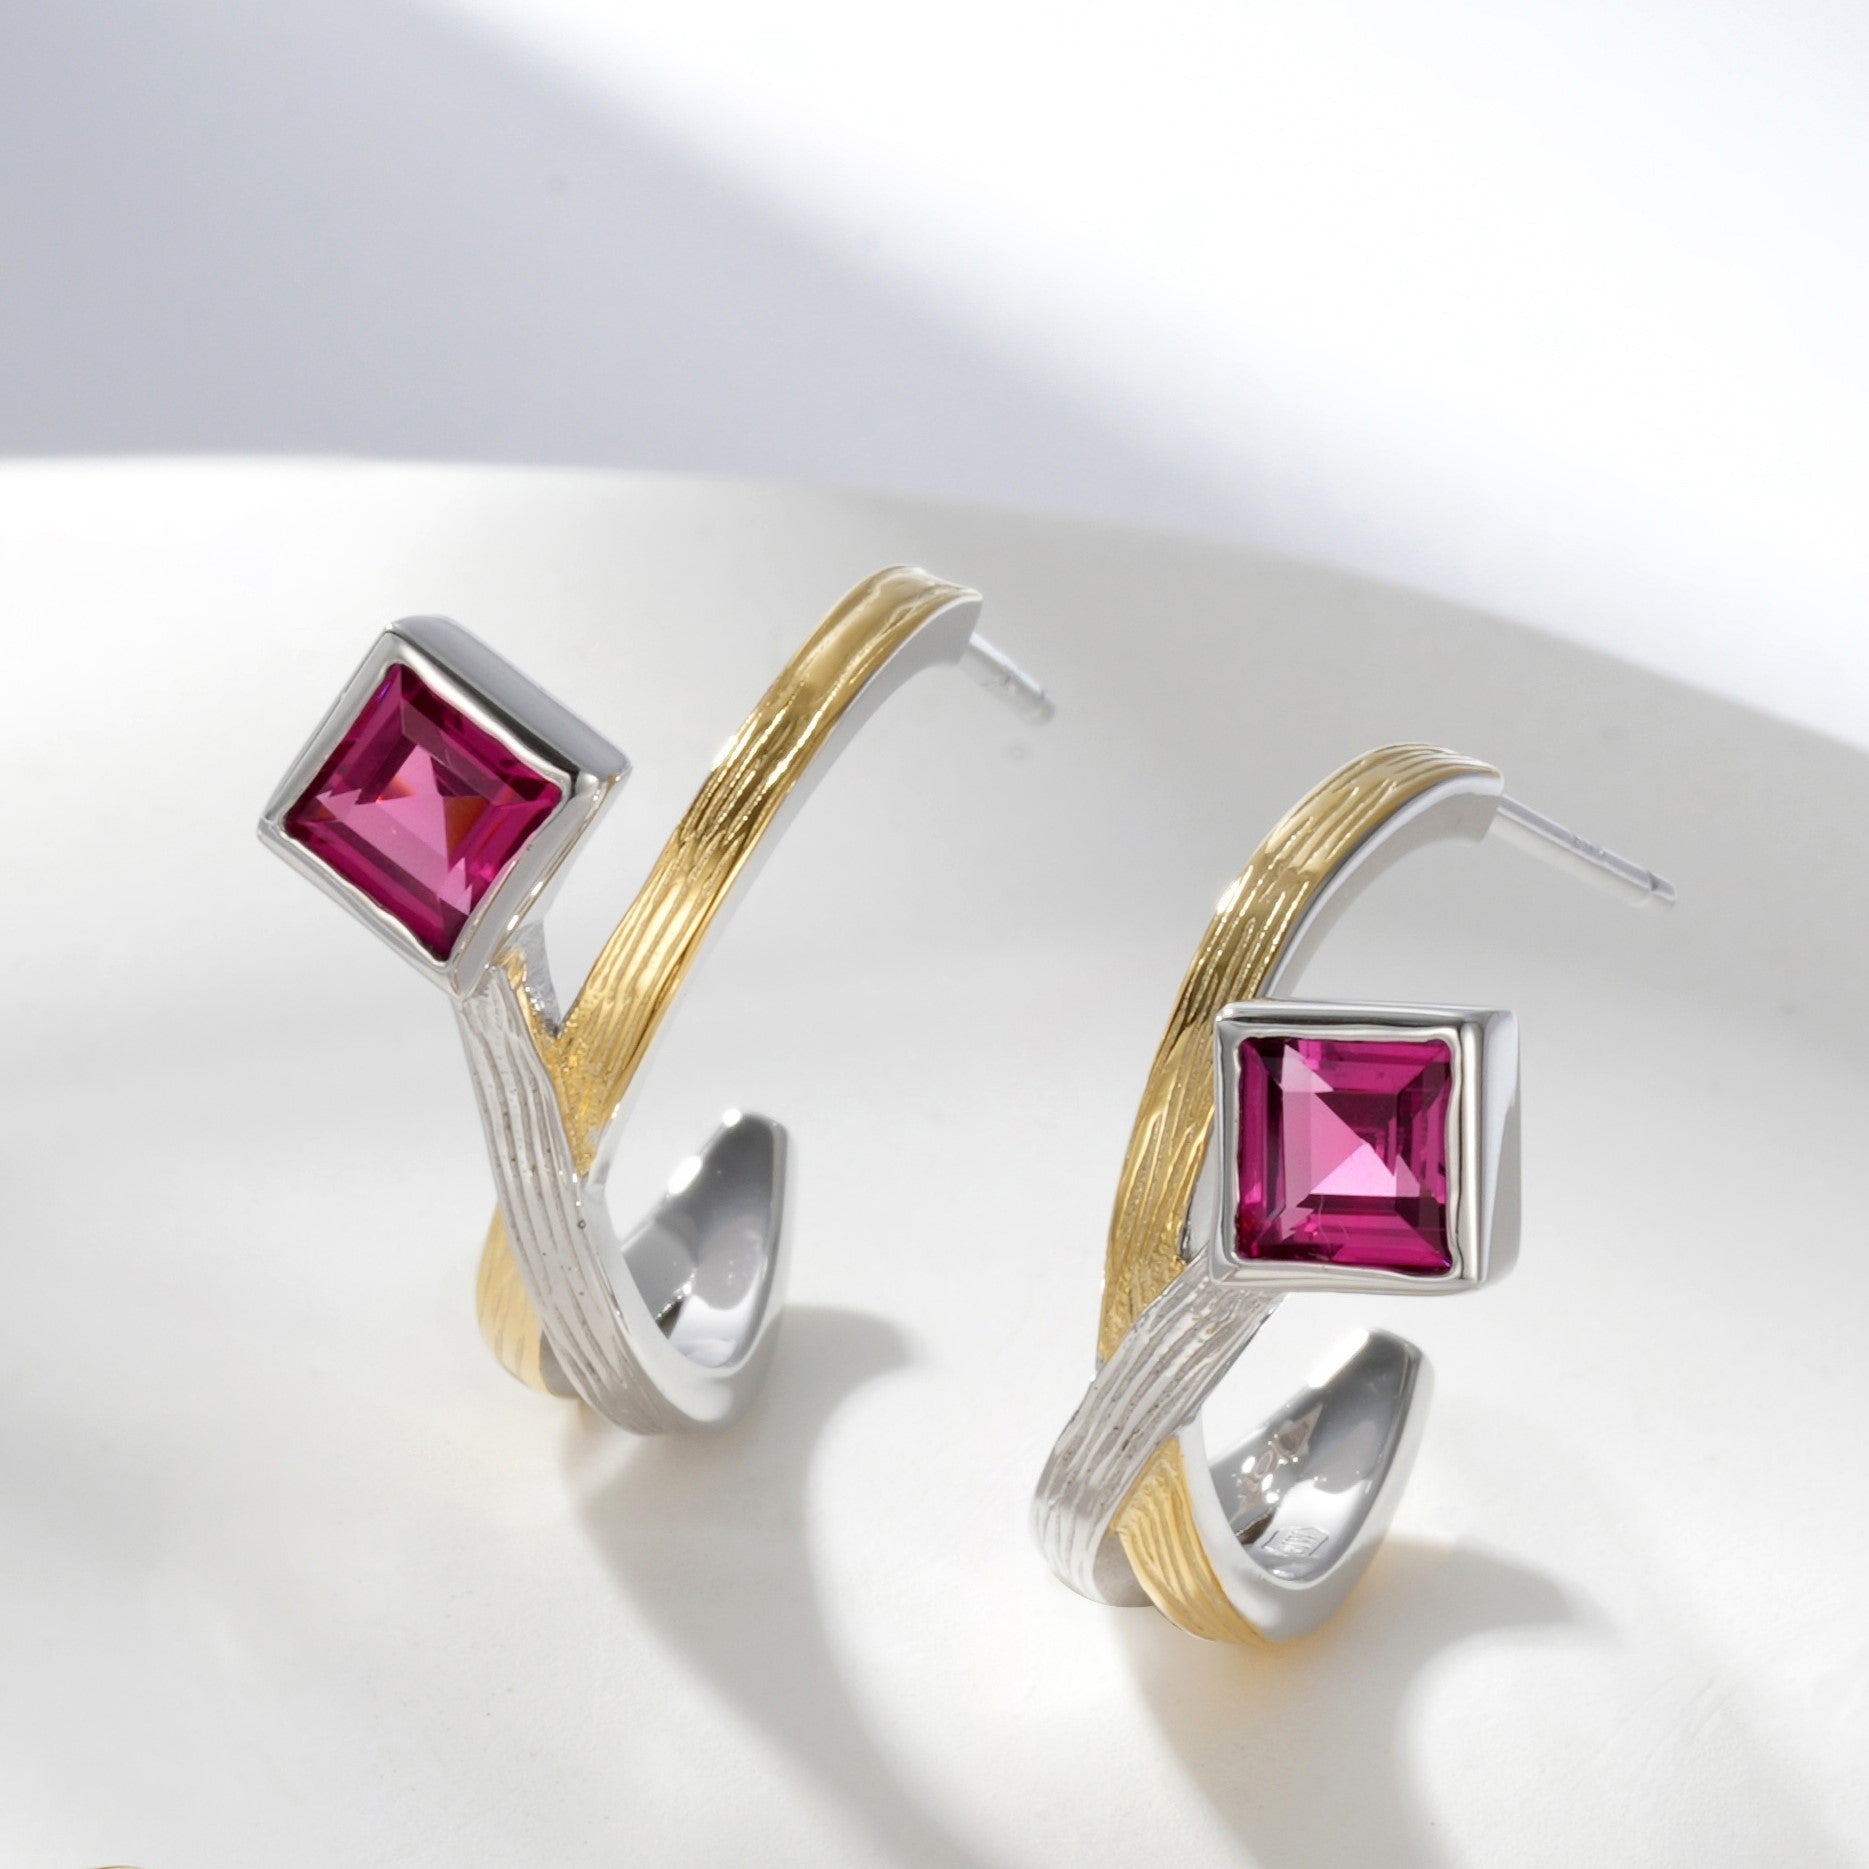 Elegant earrings with silver, gold and rodolite stones.